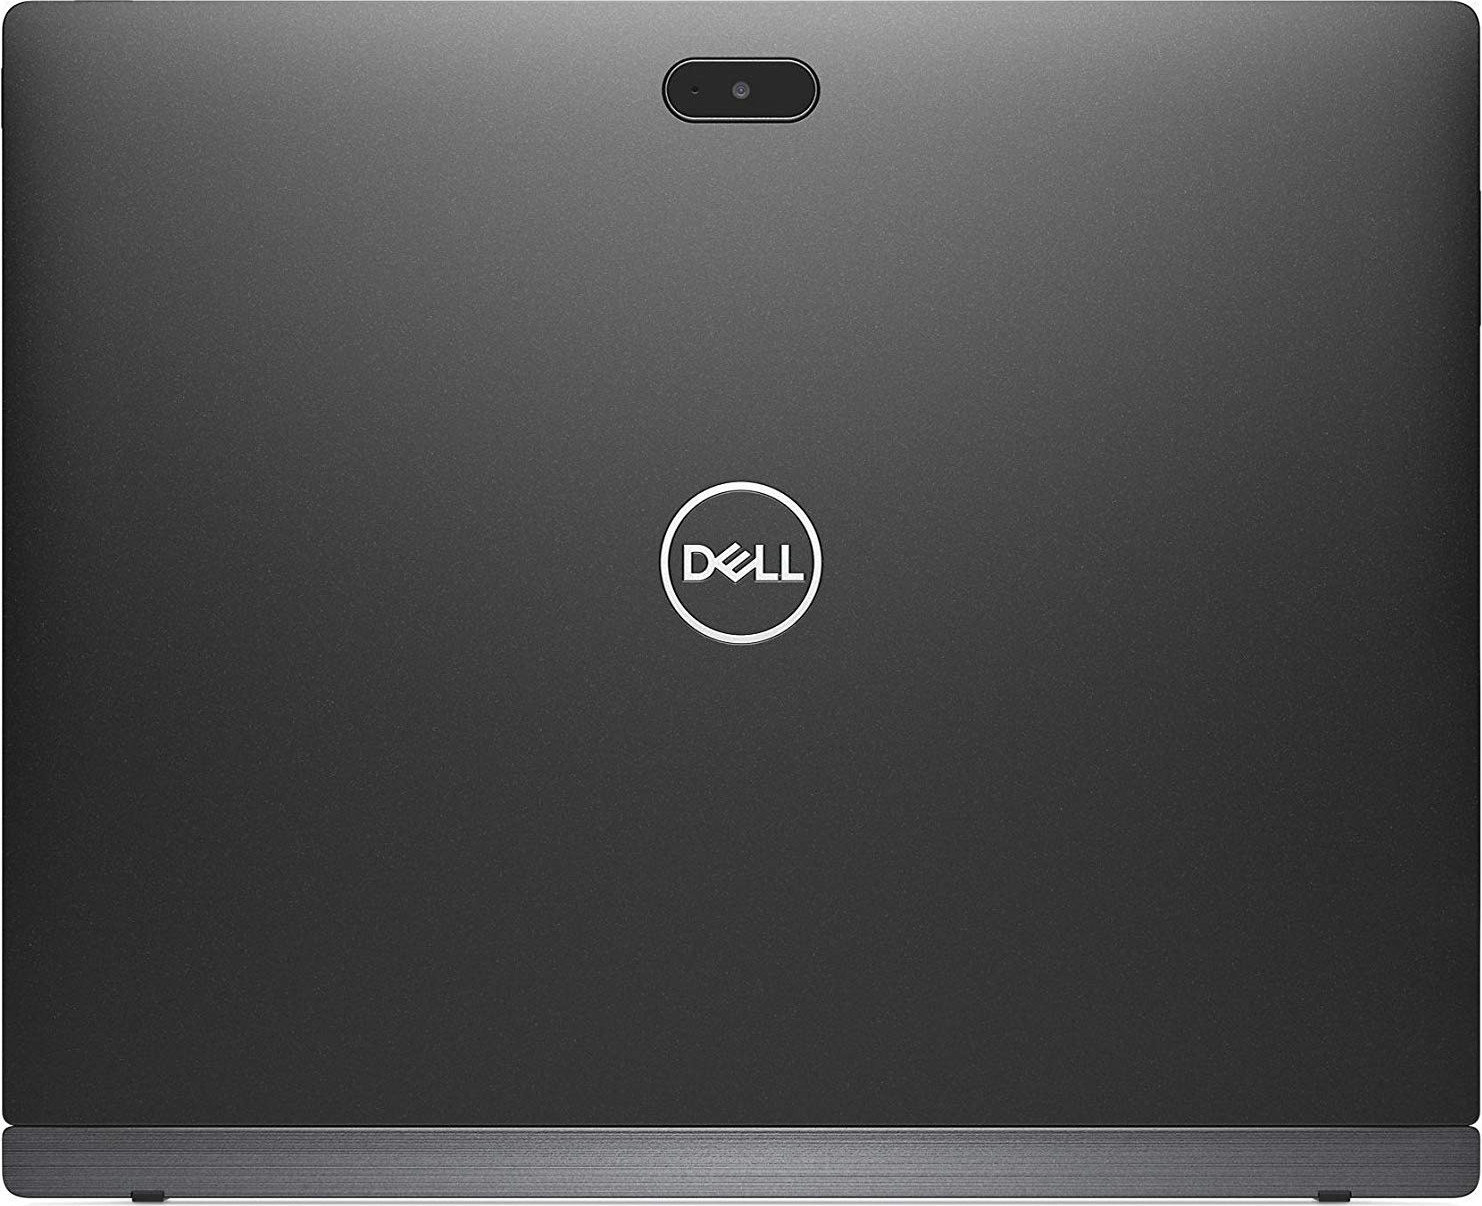 Dell Latitude 12 7000 7285 2-IN-1 Business Tablet: 12.3in Gorilla Glass TouchScreen (2880x1920), Intel Core i5-7Y54, 256GB PCIe NVMe M.2 SSD, 8GB RAM, IR Camera, Windows 10 Pro (Renewed)